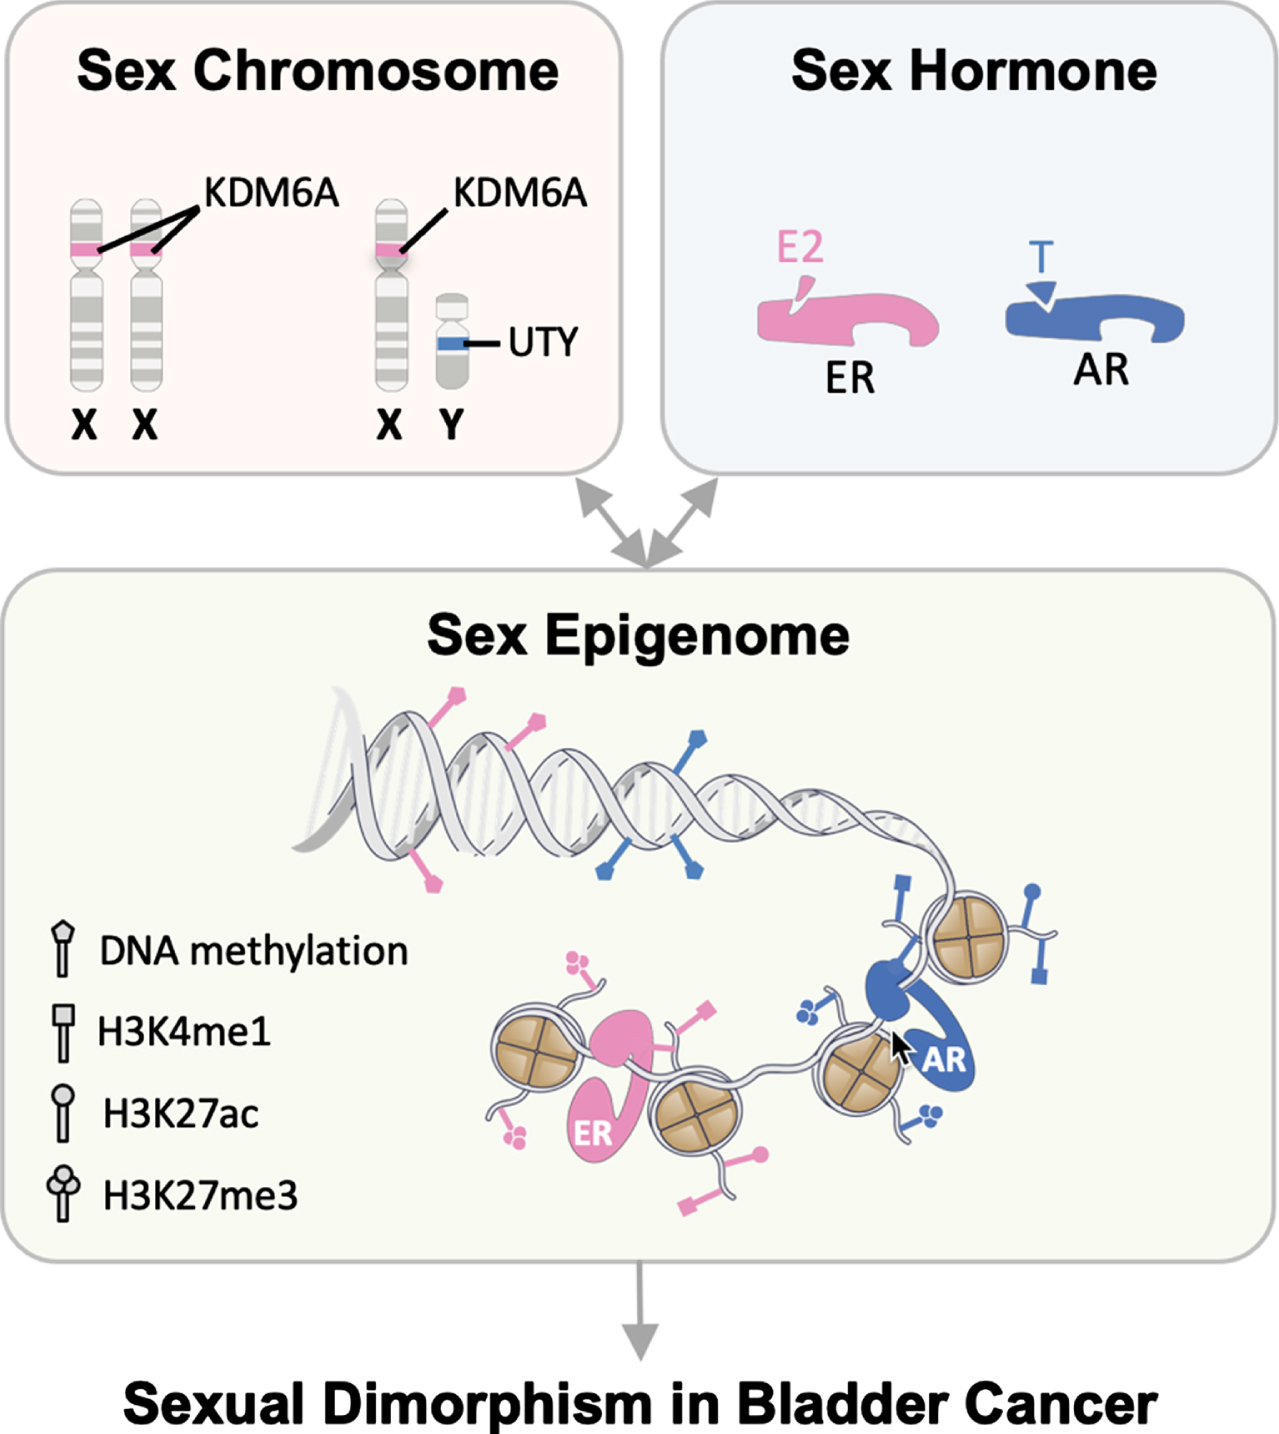 Cumulative and interactive effects from sex chromosomes, sex hormones, and the sex epigenome result in sexual dimorphism in BC. Sex-specific differences in post-translational modifications and chromatin organizations, also known as the sex epigenome, functionally influence gene expression and/or response to the environment. We propose a novel framework to understand the drivers of sex differences in BC: the sex epigenome acts as a universal platform where the effects of sex chromosomes and sex hormones converge to result in the observed sex bias in BC.